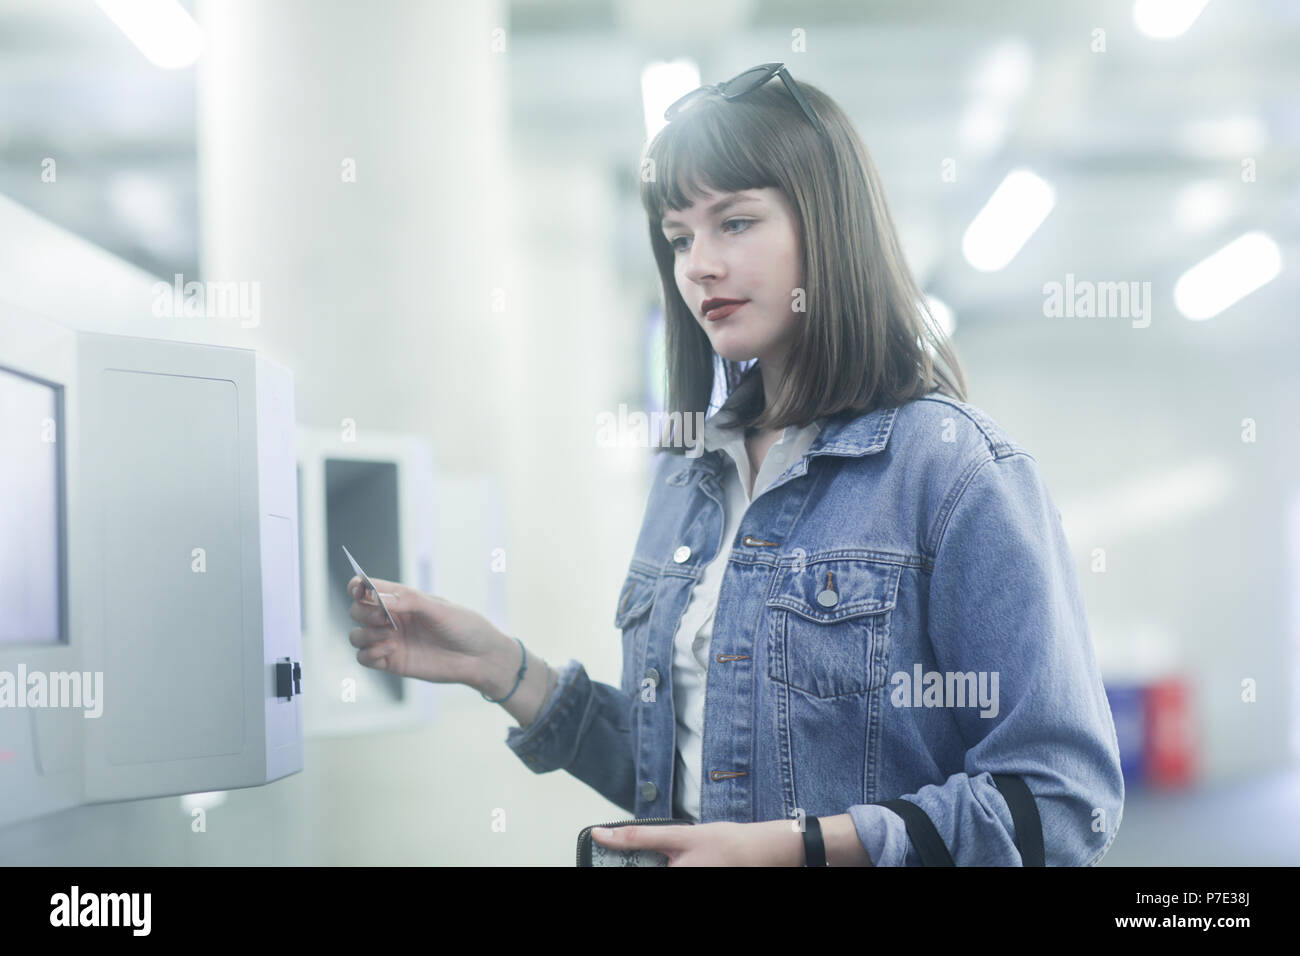 Woman using identity card on security machine Stock Photo